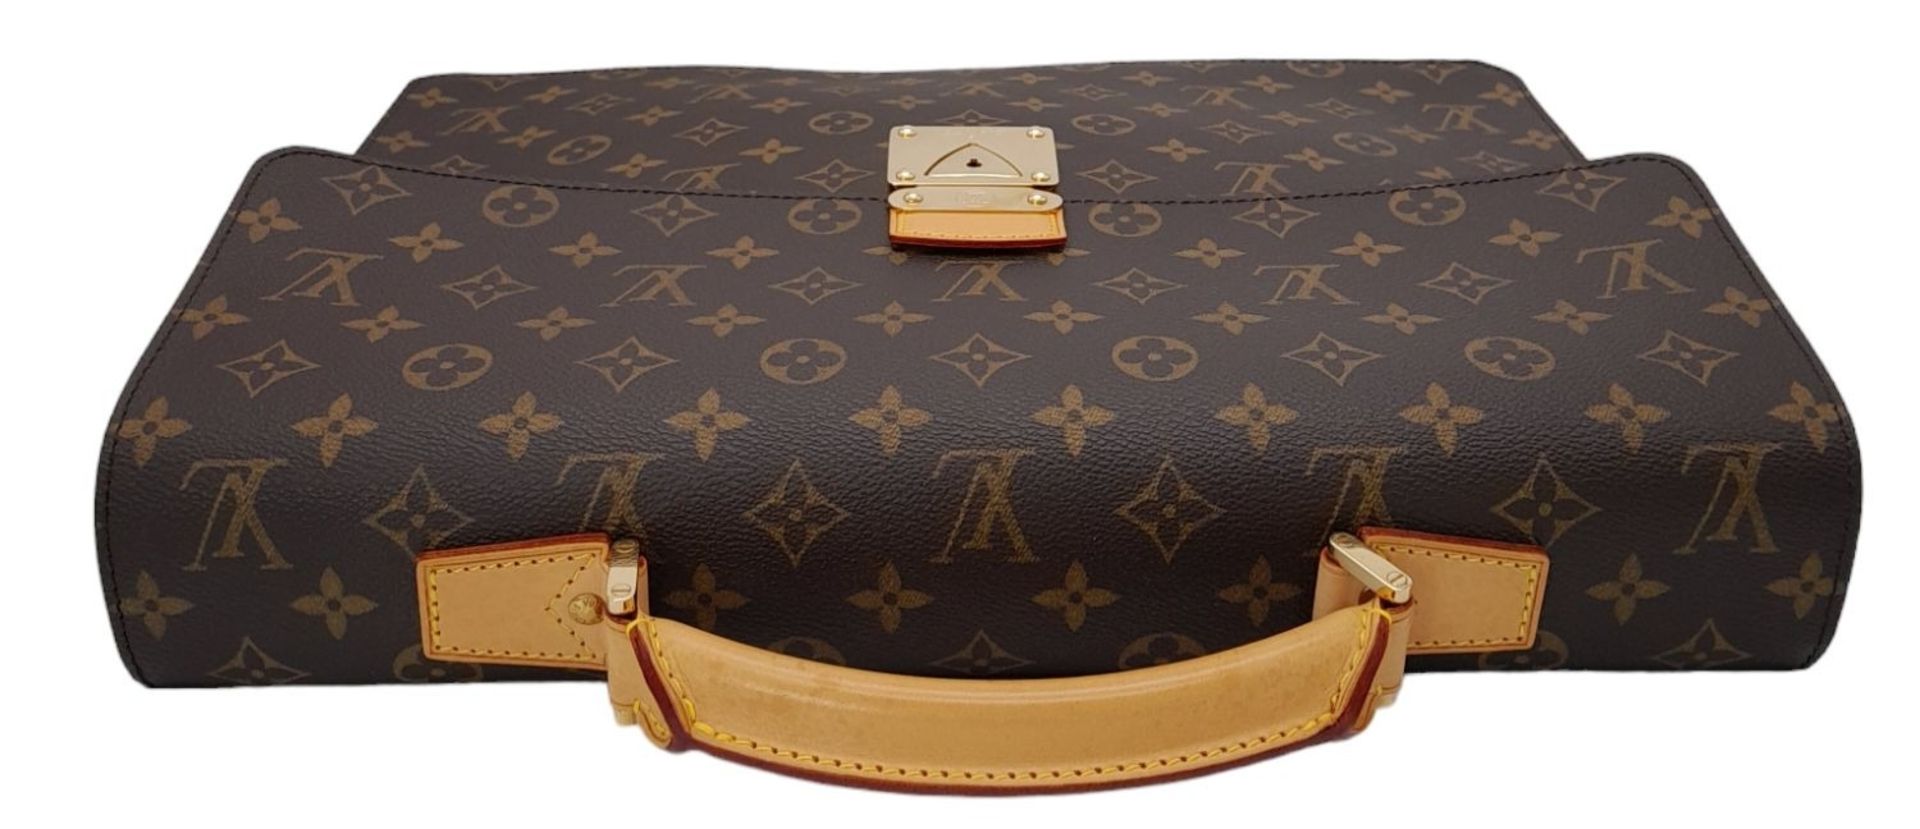 AN IMMACULATE LOUIS VUITTON CLASSIC BRIEF CASE IN UNUSED CONDITION WITH ORIGINAL DUST COVER . 38 X - Image 8 of 10